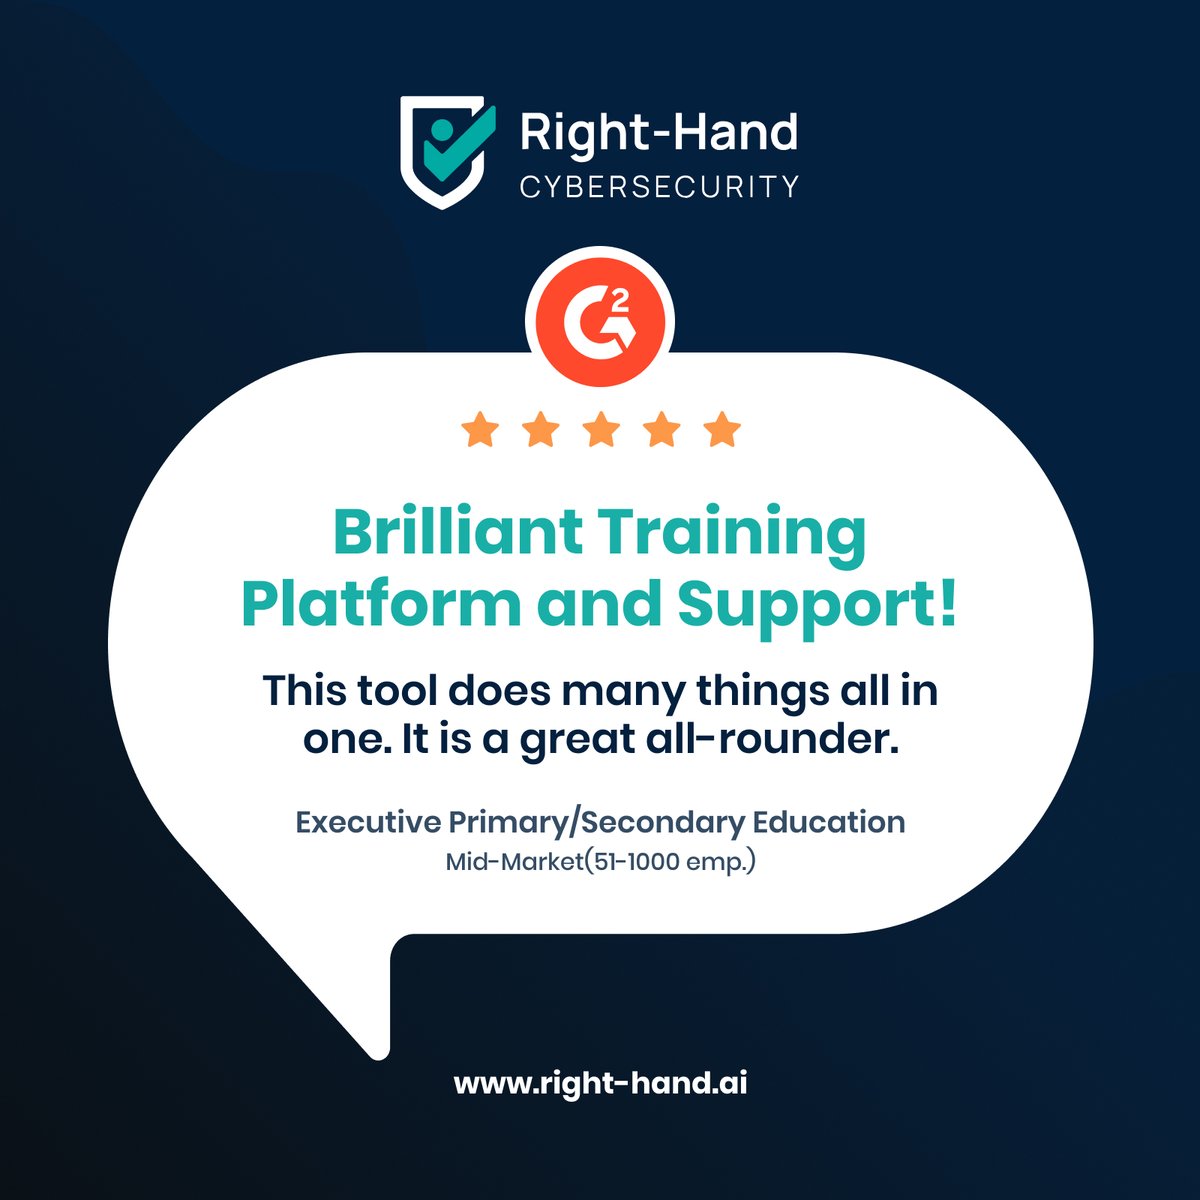 🚀 Ecstatic over glowing reviews from education sector clients! Our goal: impactful #Cybersecurity training tailored to your org's unique needs. See why they're raving about us! Check it out here: hubs.li/Q02c-vZq0 #SecurityTraining #ClientSuccess